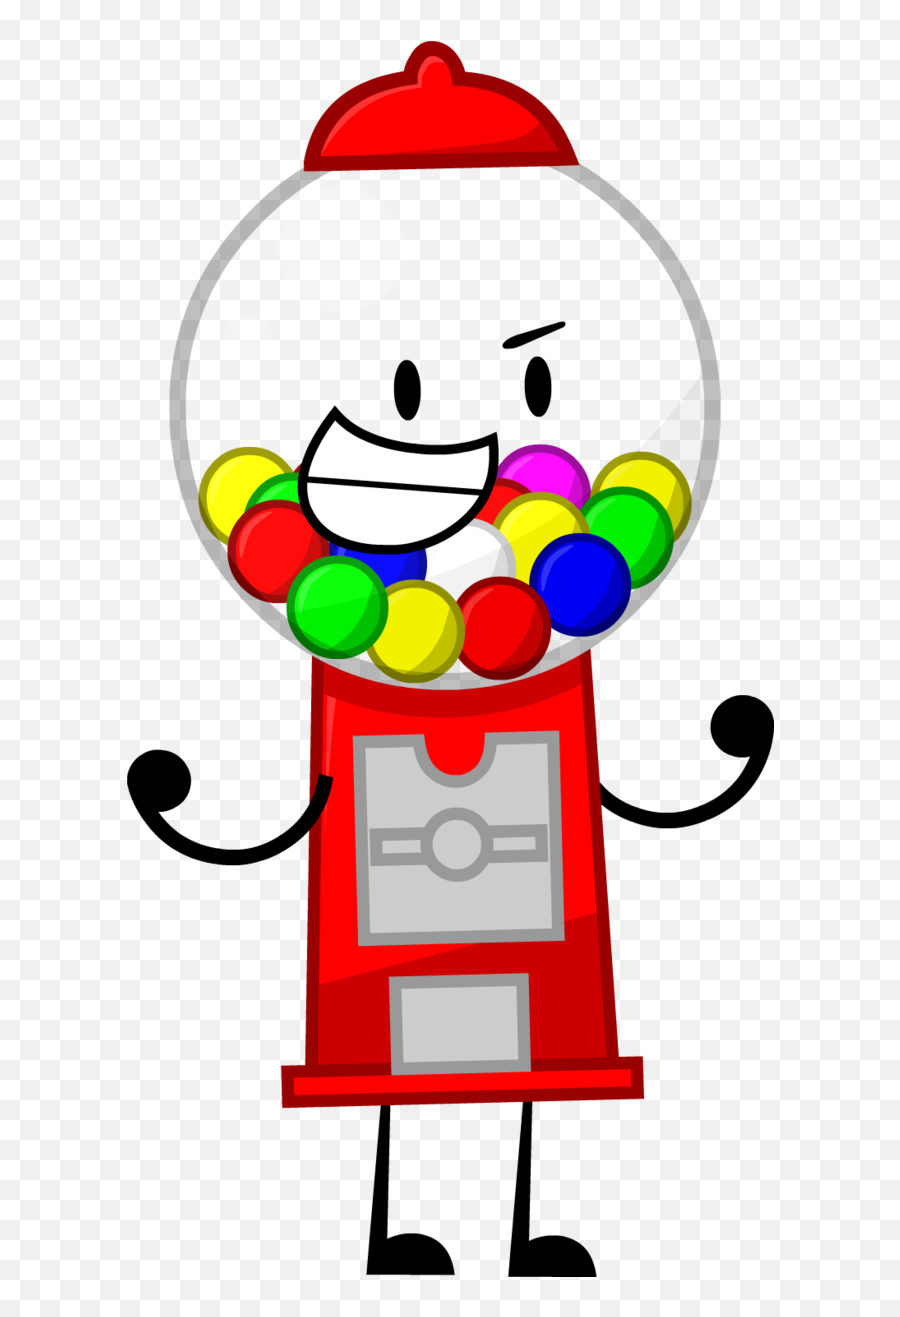 Library Gumball Machine Clipart At - Gumball Machine Drawings Emoji,Gumball Machine Clipart